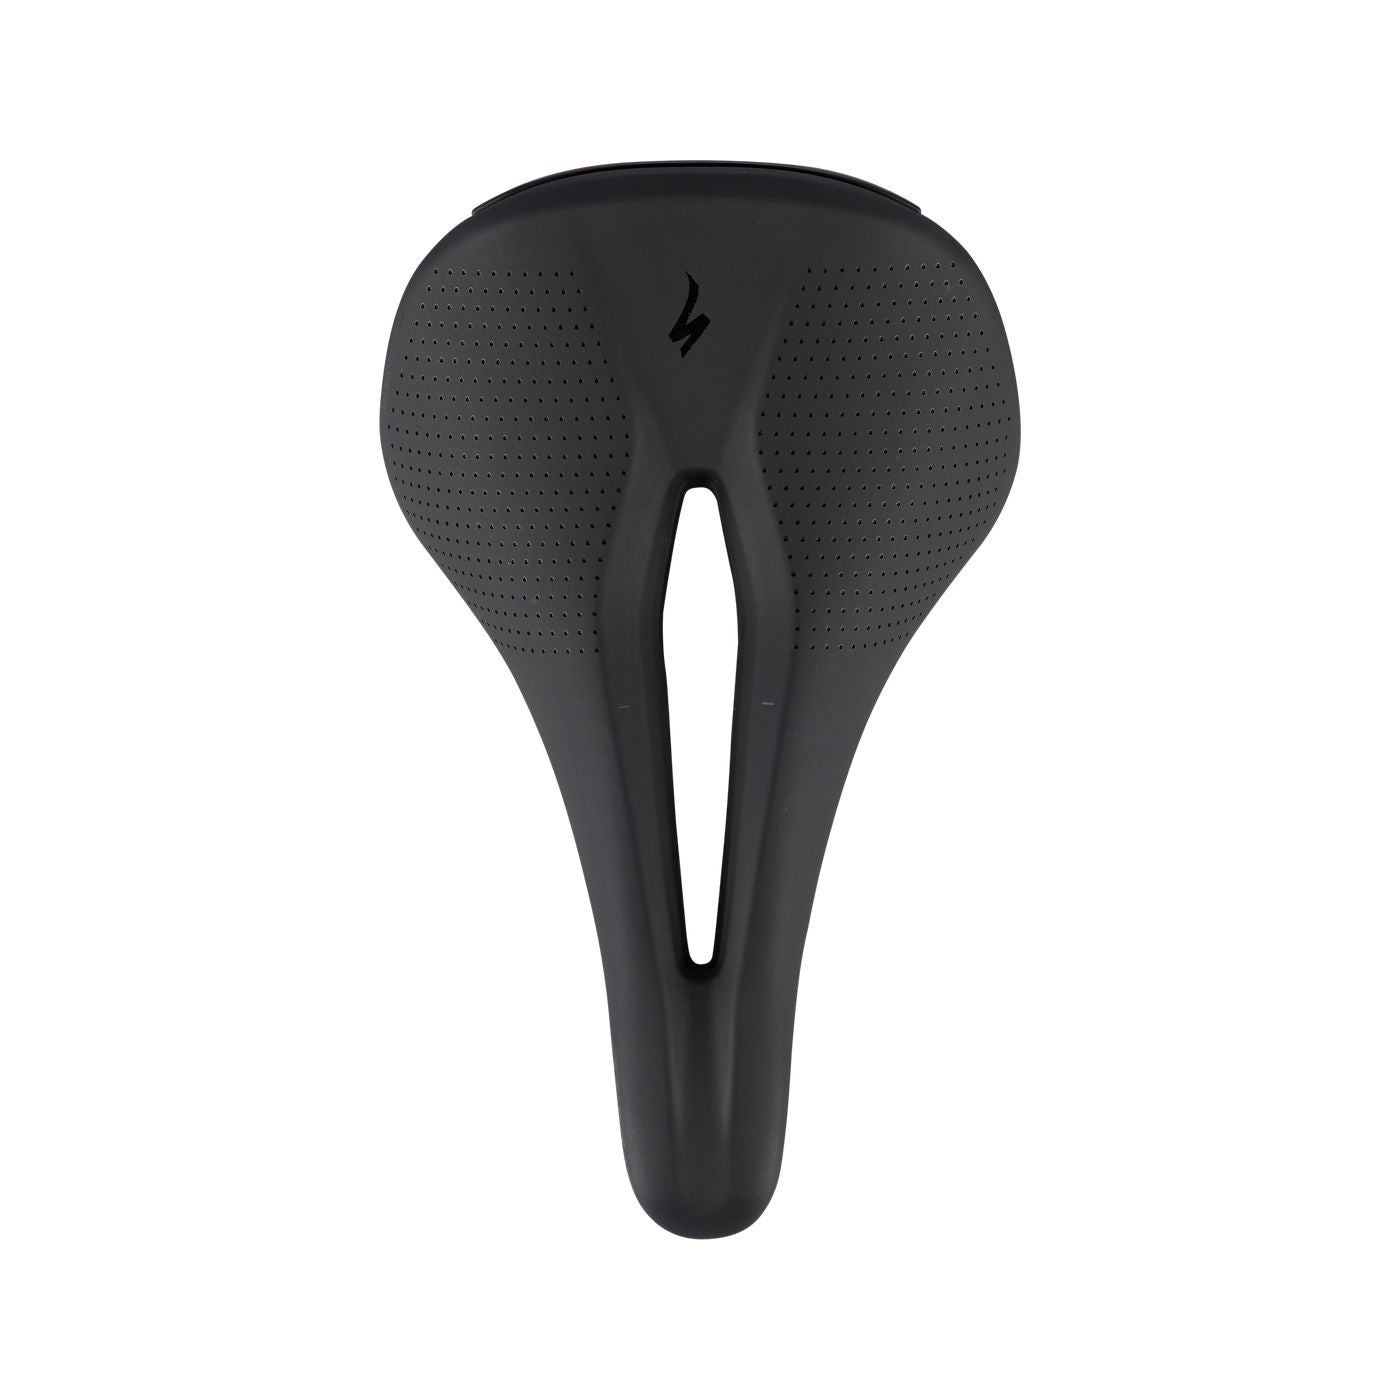 Specialized Power Arc Expert - Saddles - Bicycle Warehouse